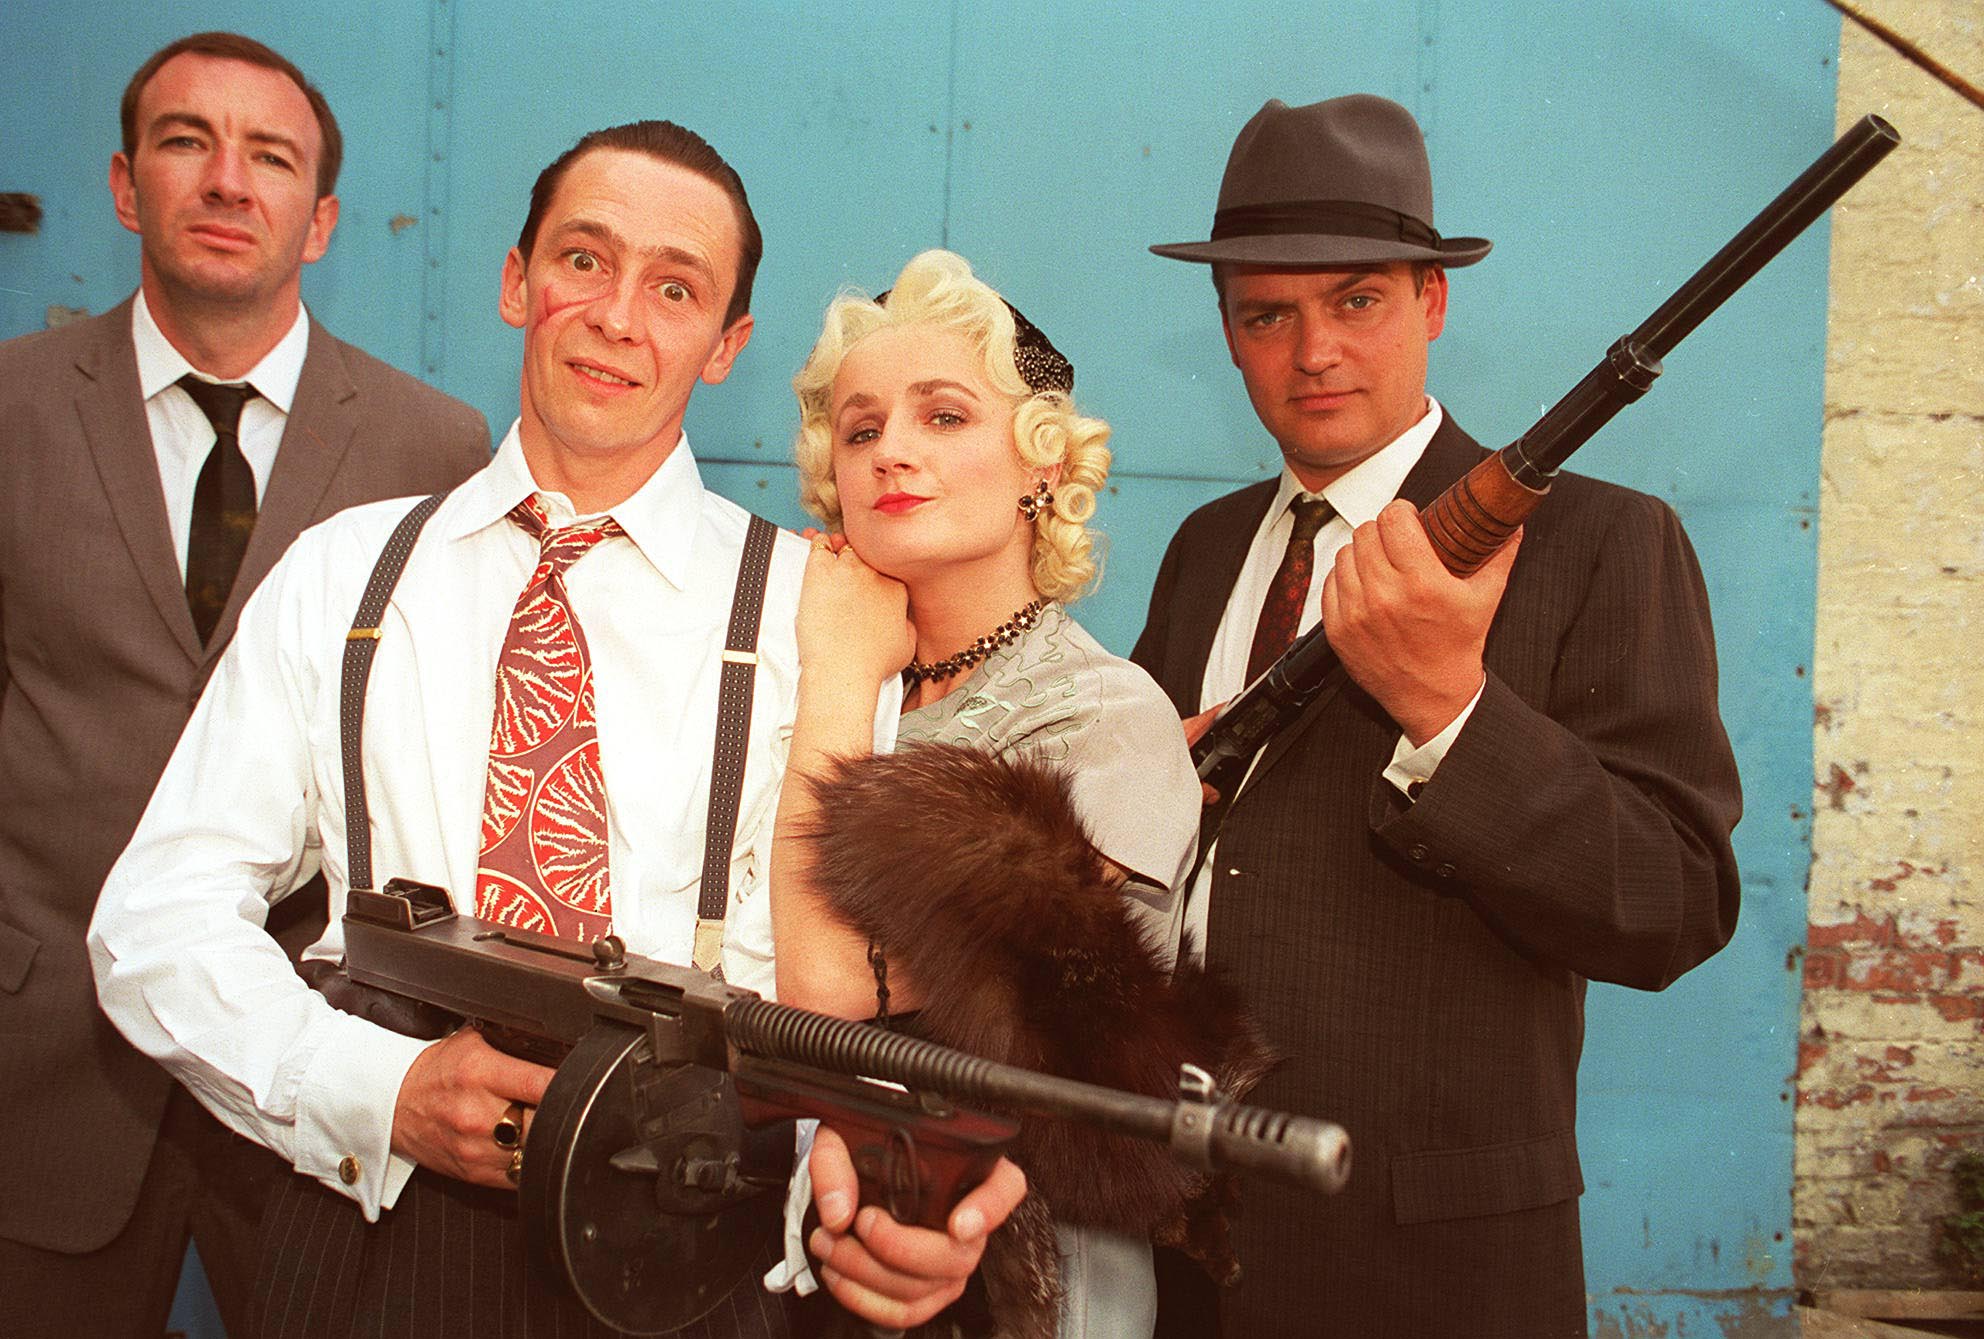 Fast characters: Simon Day, Paul Whitehouse: Caroline Aherne and Charlie Higson in a 1995 publicity shot for ‘The Fast Show’